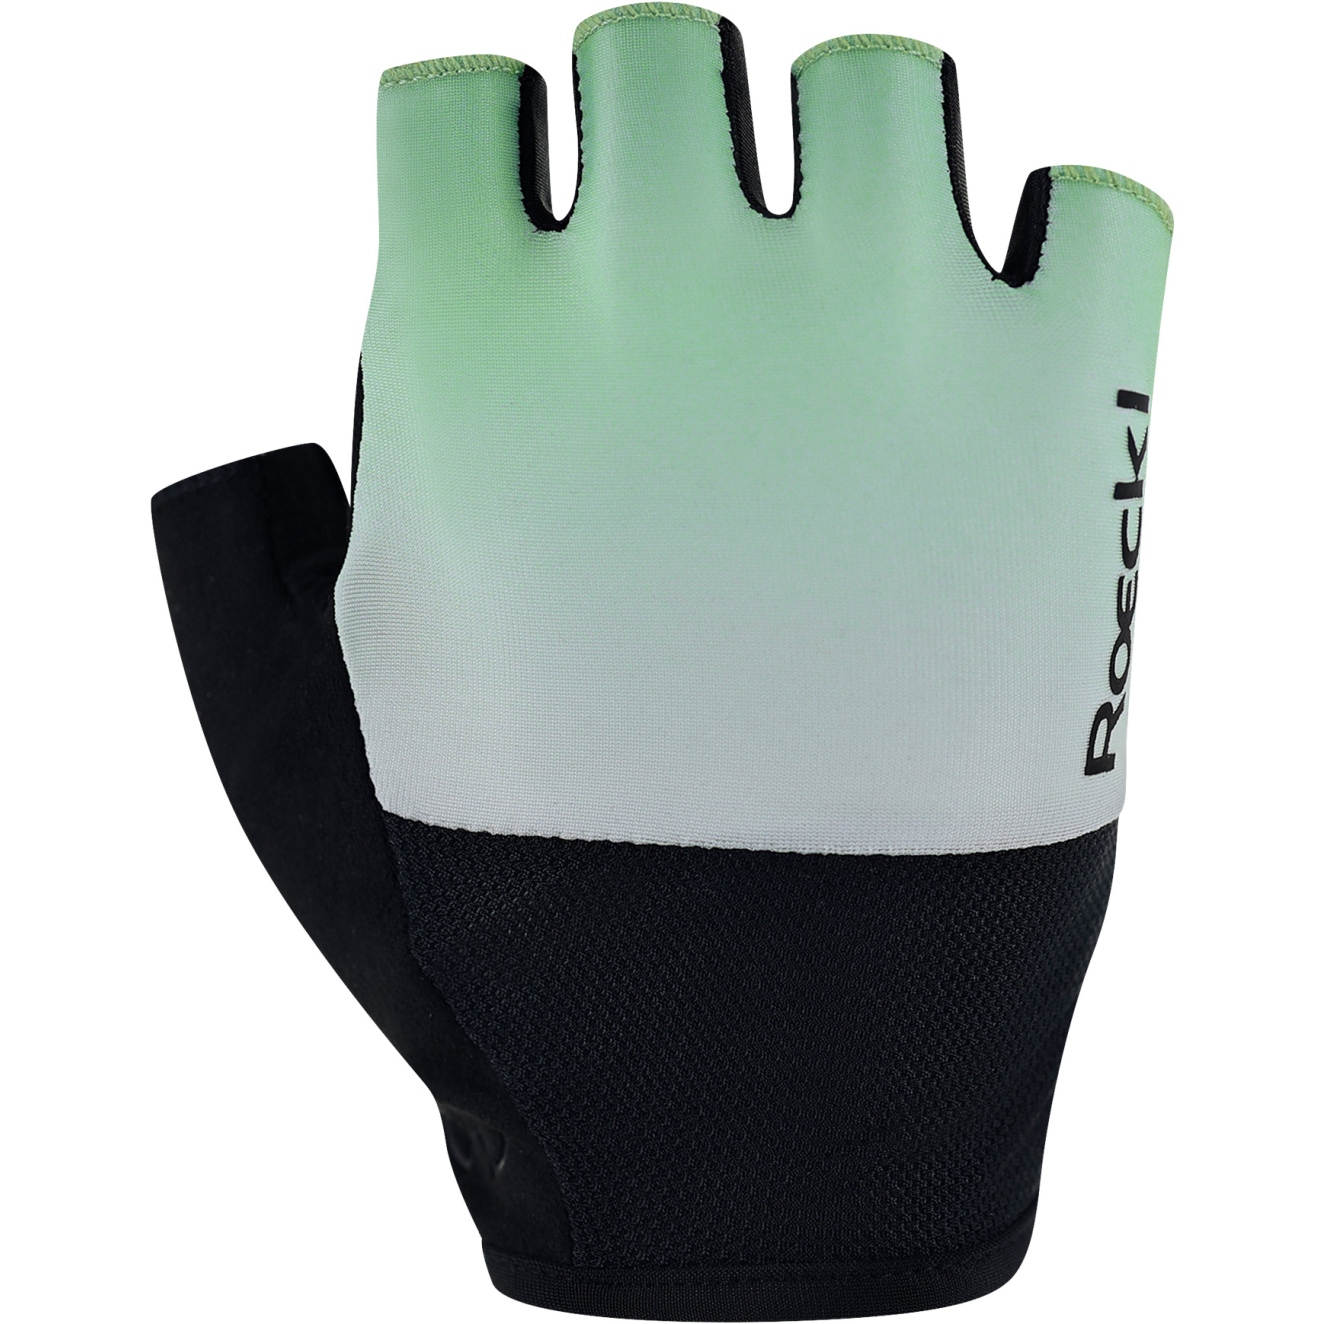 Image of Roeckl Sports Bruneck Cycling Gloves - misty jade 6110